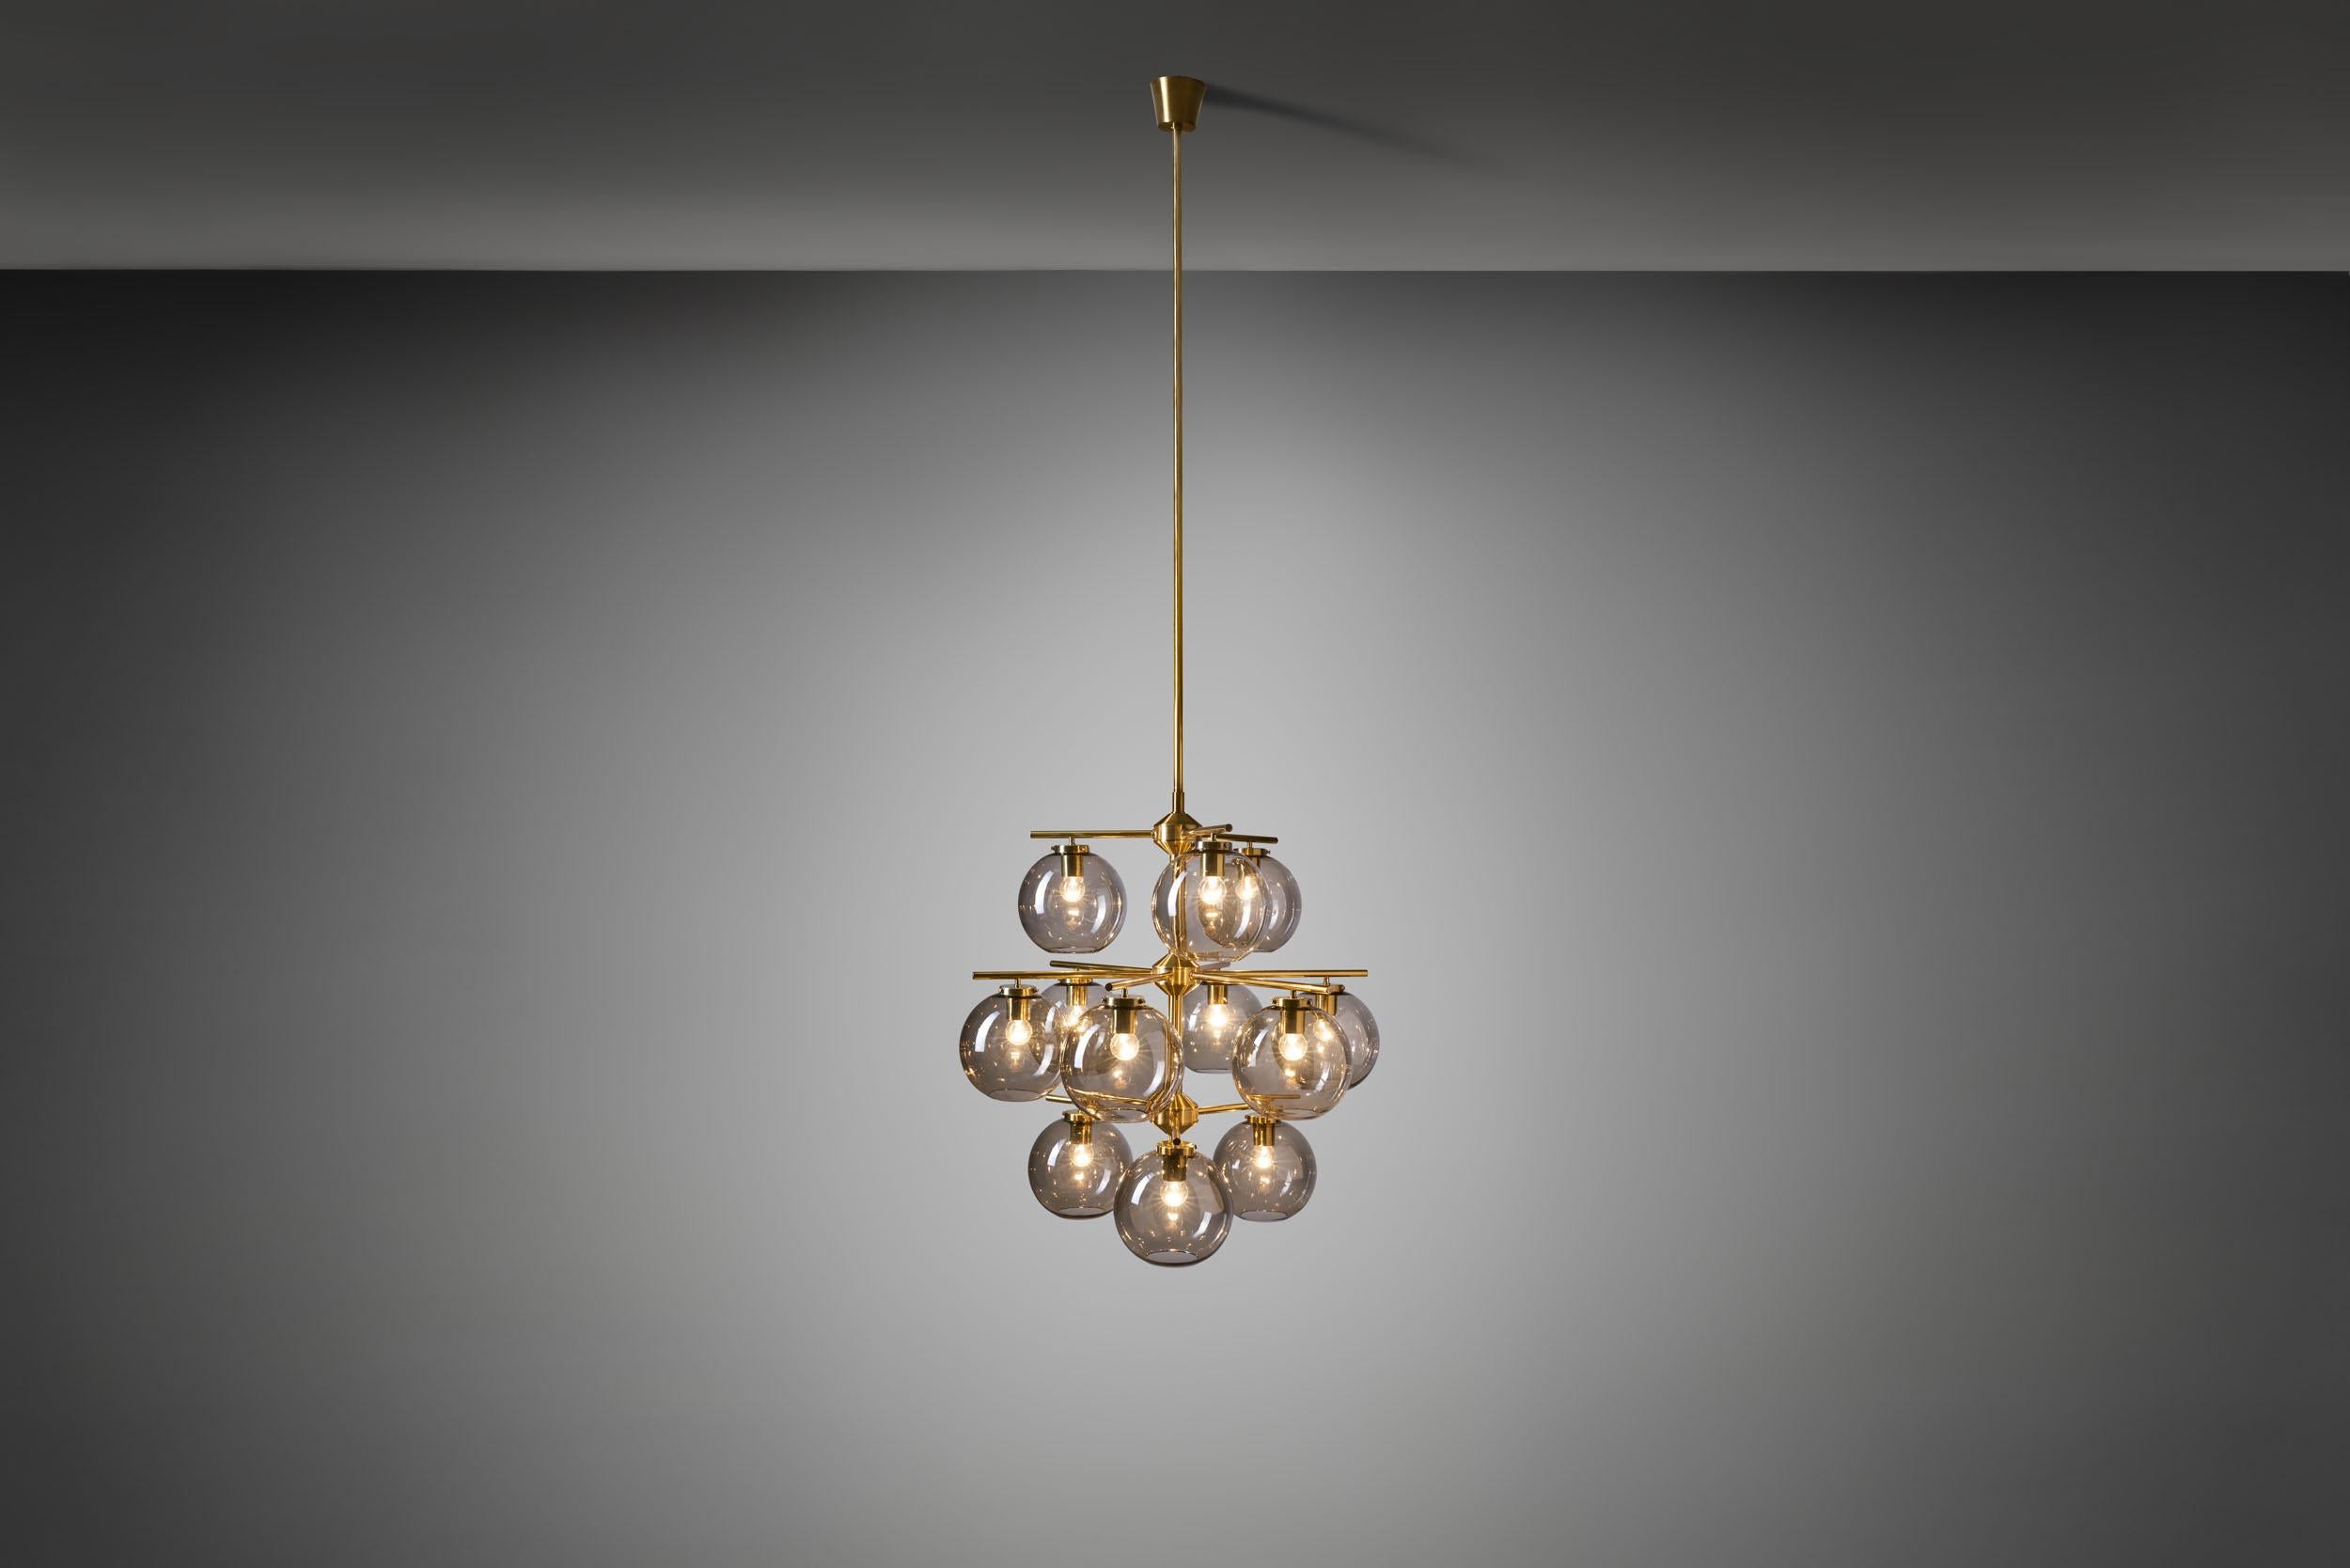 This marvellous chandelier is one of the most recognizable Swedish lighting designs of the mid-century era. With a brass frame holding 12 smoked, translucent glass shades, grandiose is the word to describe this model by. This model was designed by